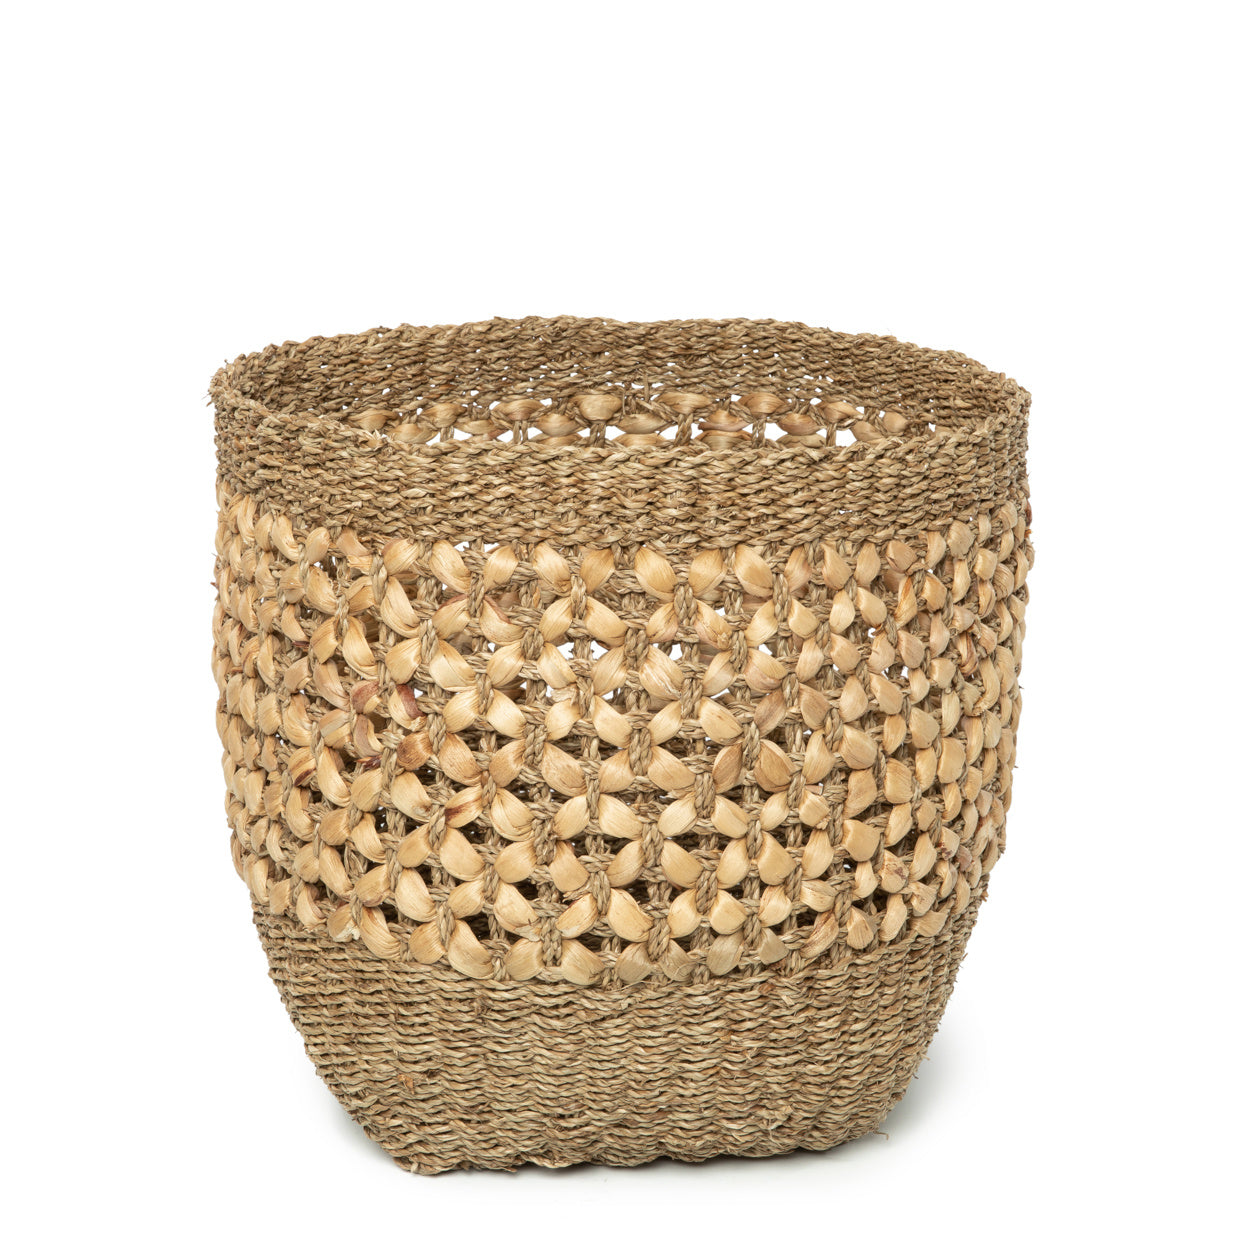 THE HALONG BAY Baskets Set of 3 front view single baskeg